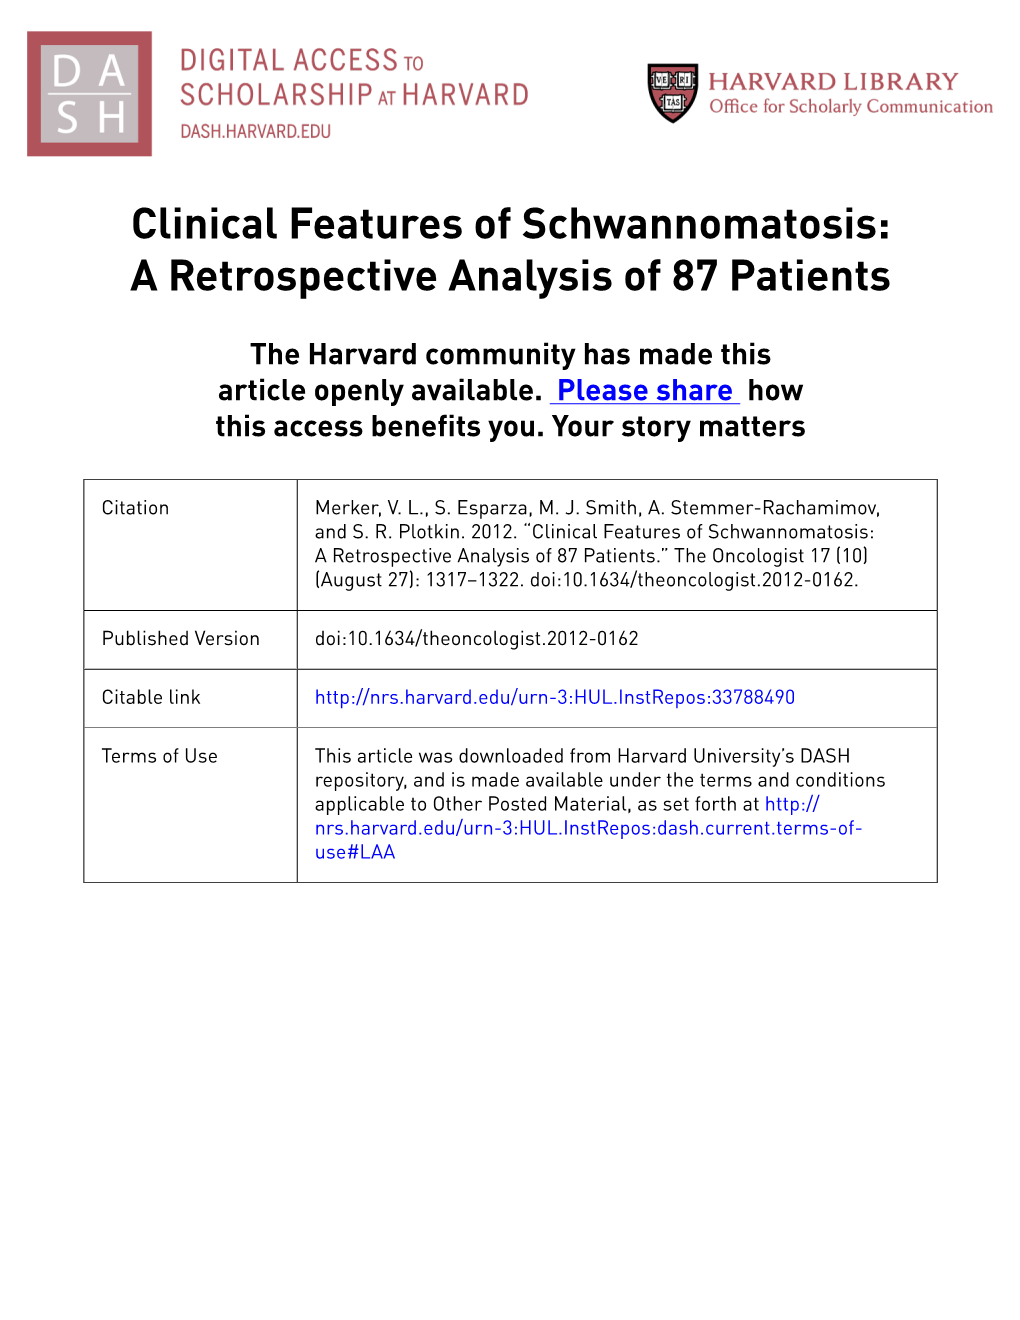 Clinical Features of Schwannomatosis: a Retrospective Analysis of 87 Patients